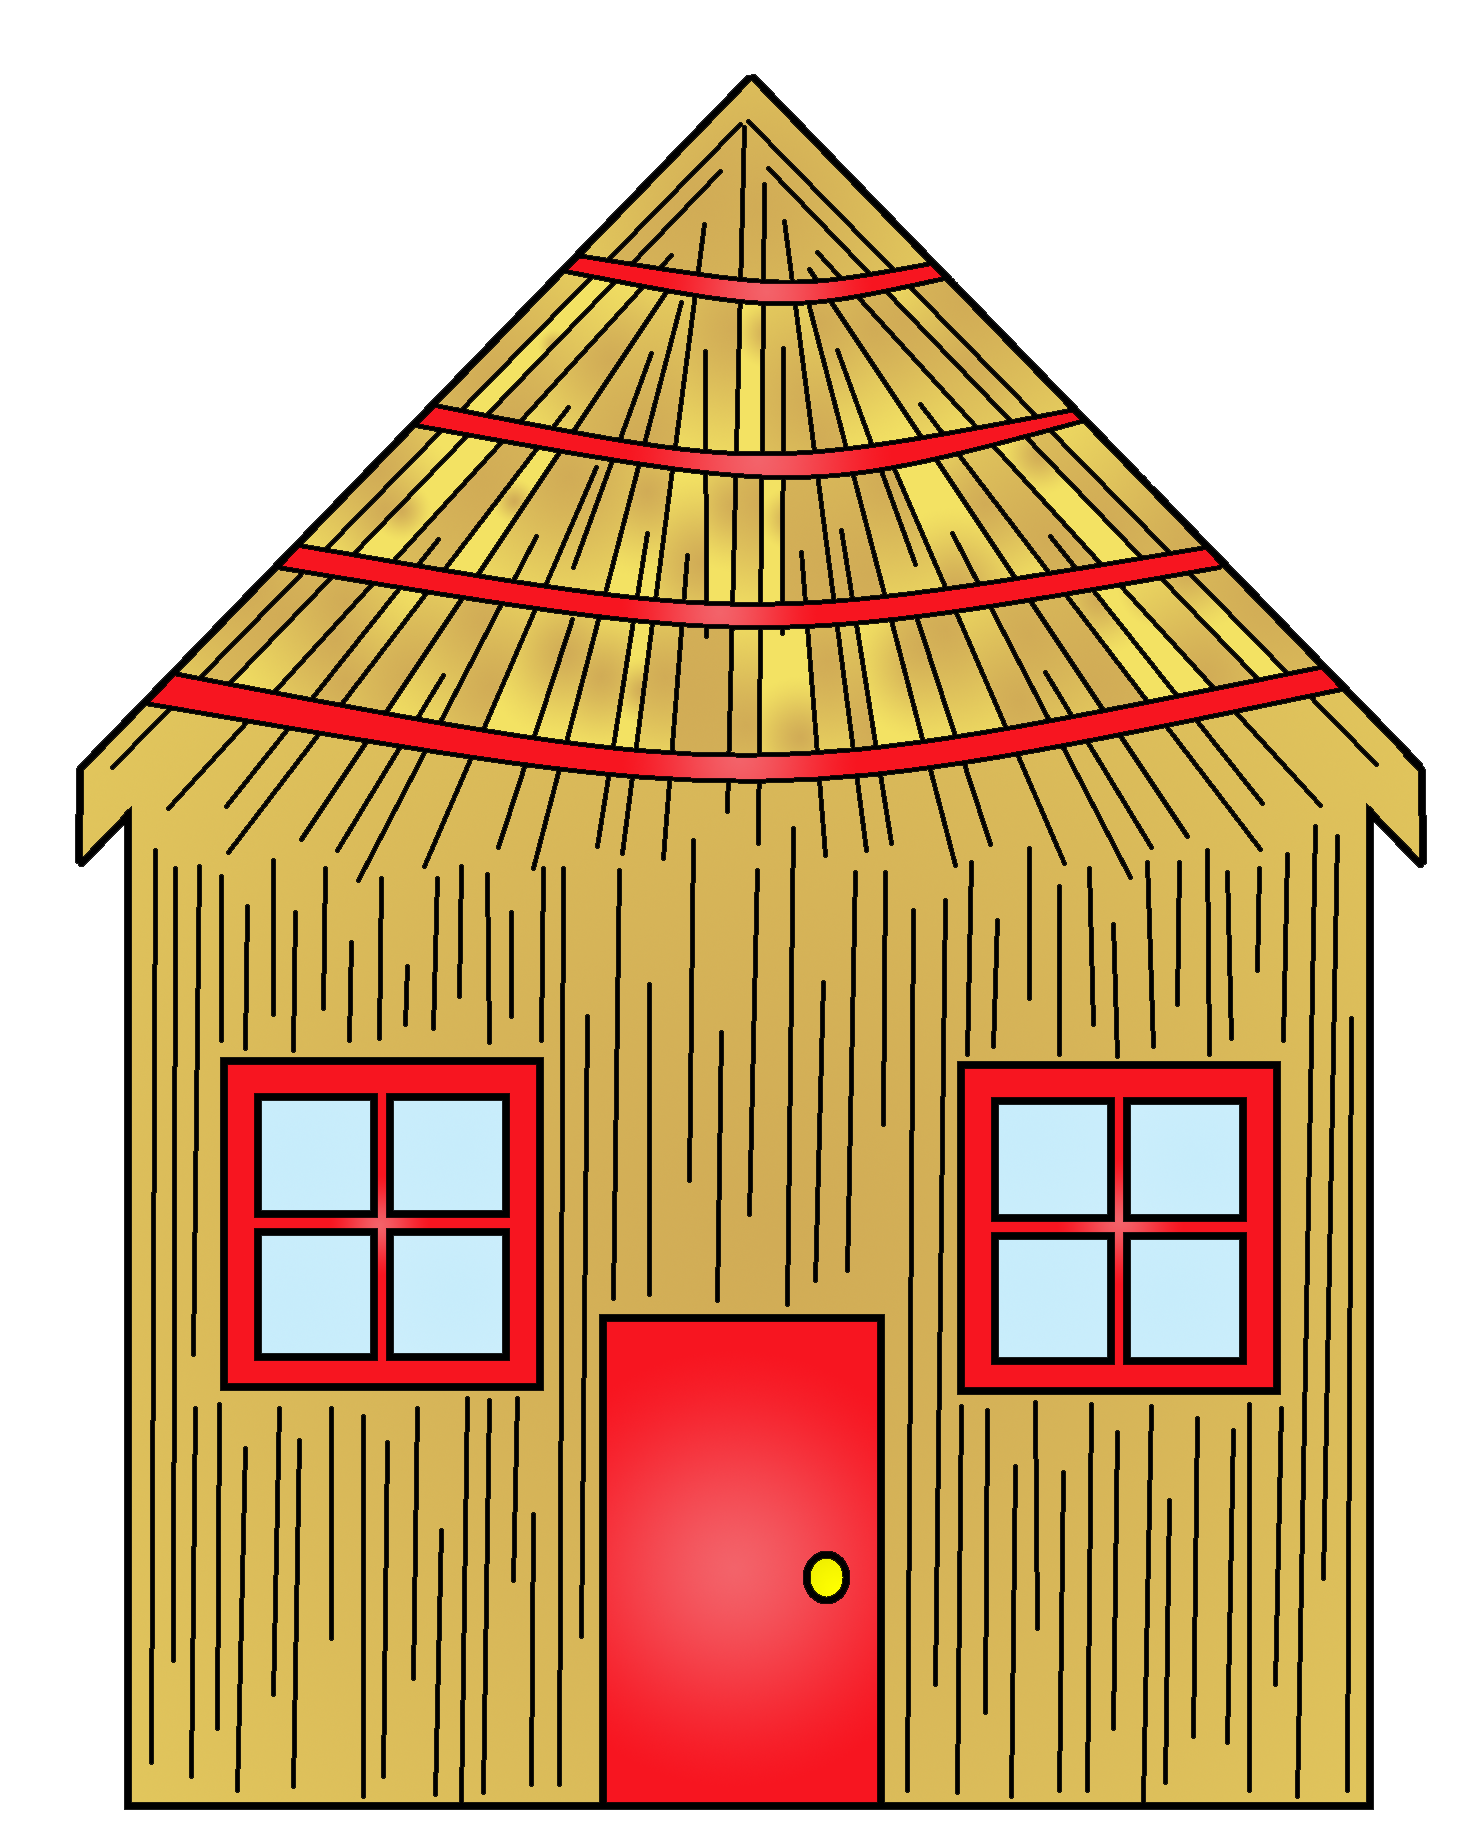 Graphics by ruth little. Hut clipart straw house